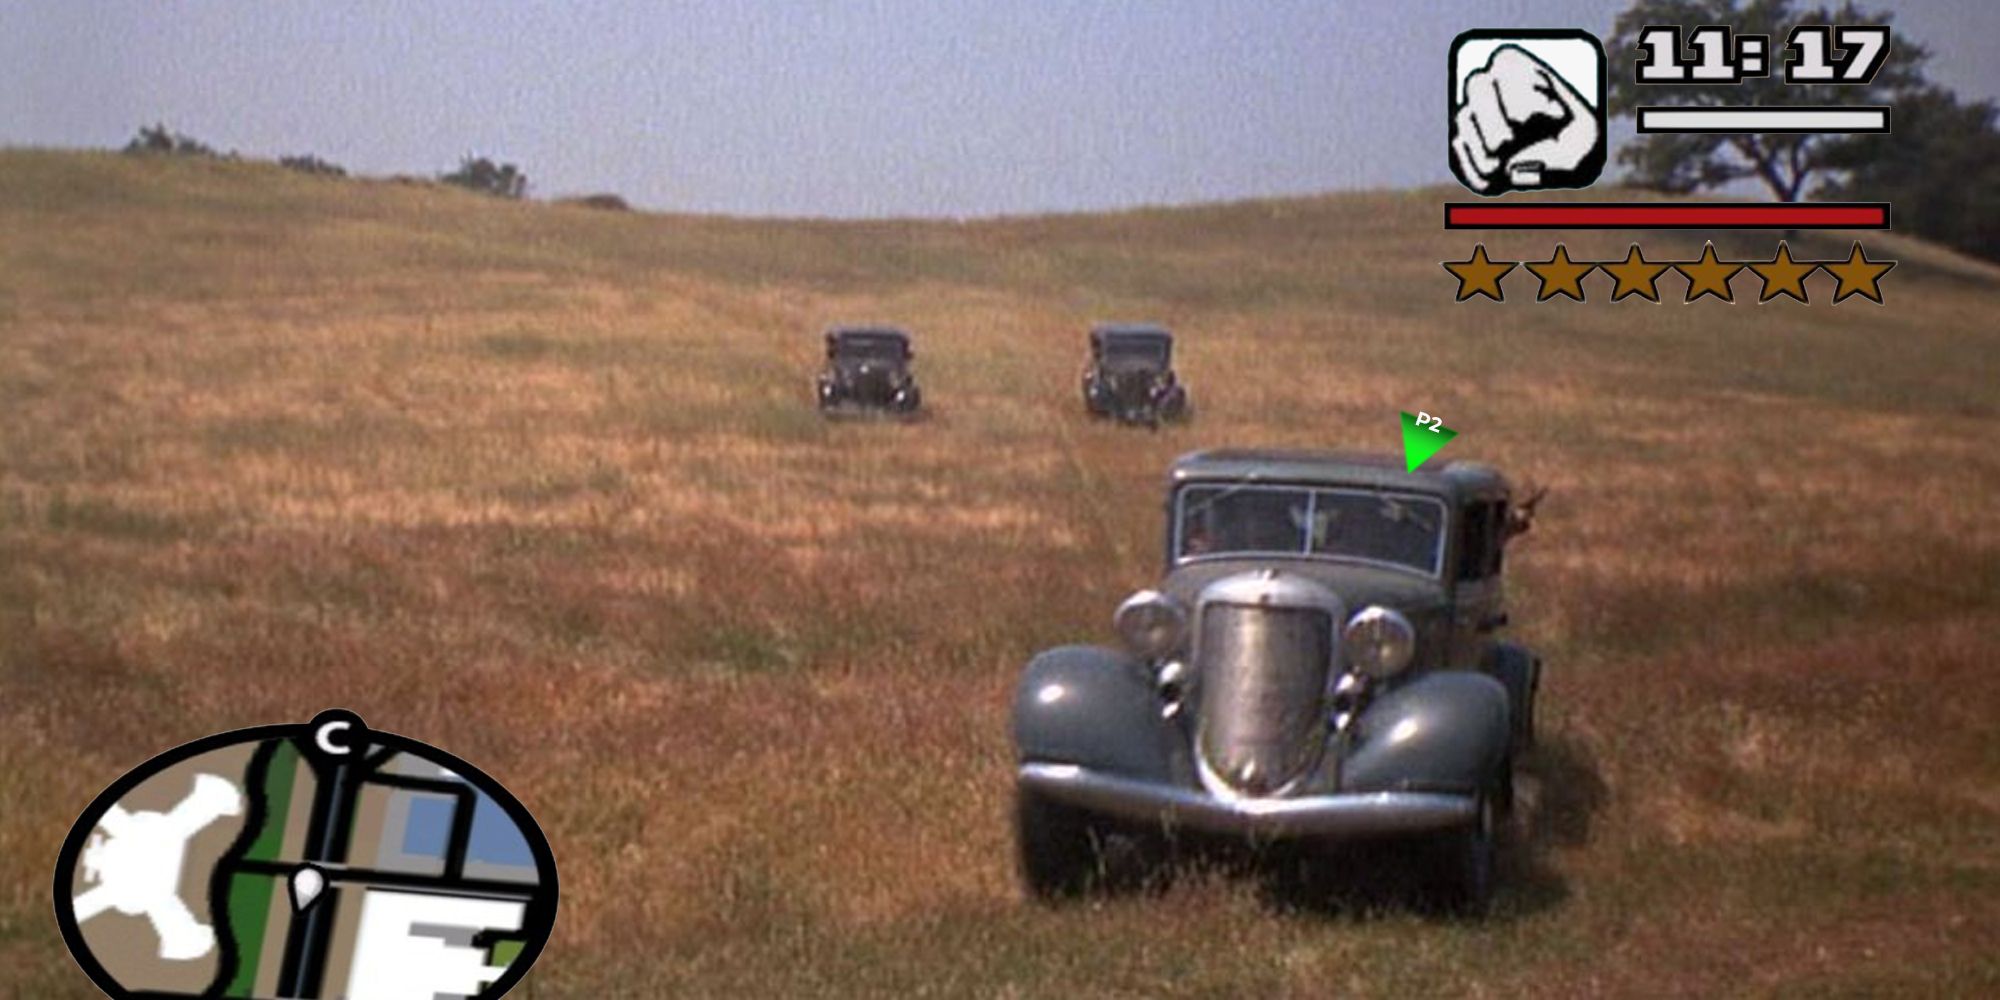 A shot from Bonnie and Clyde showing old cars with GTA UI superimposed on it.